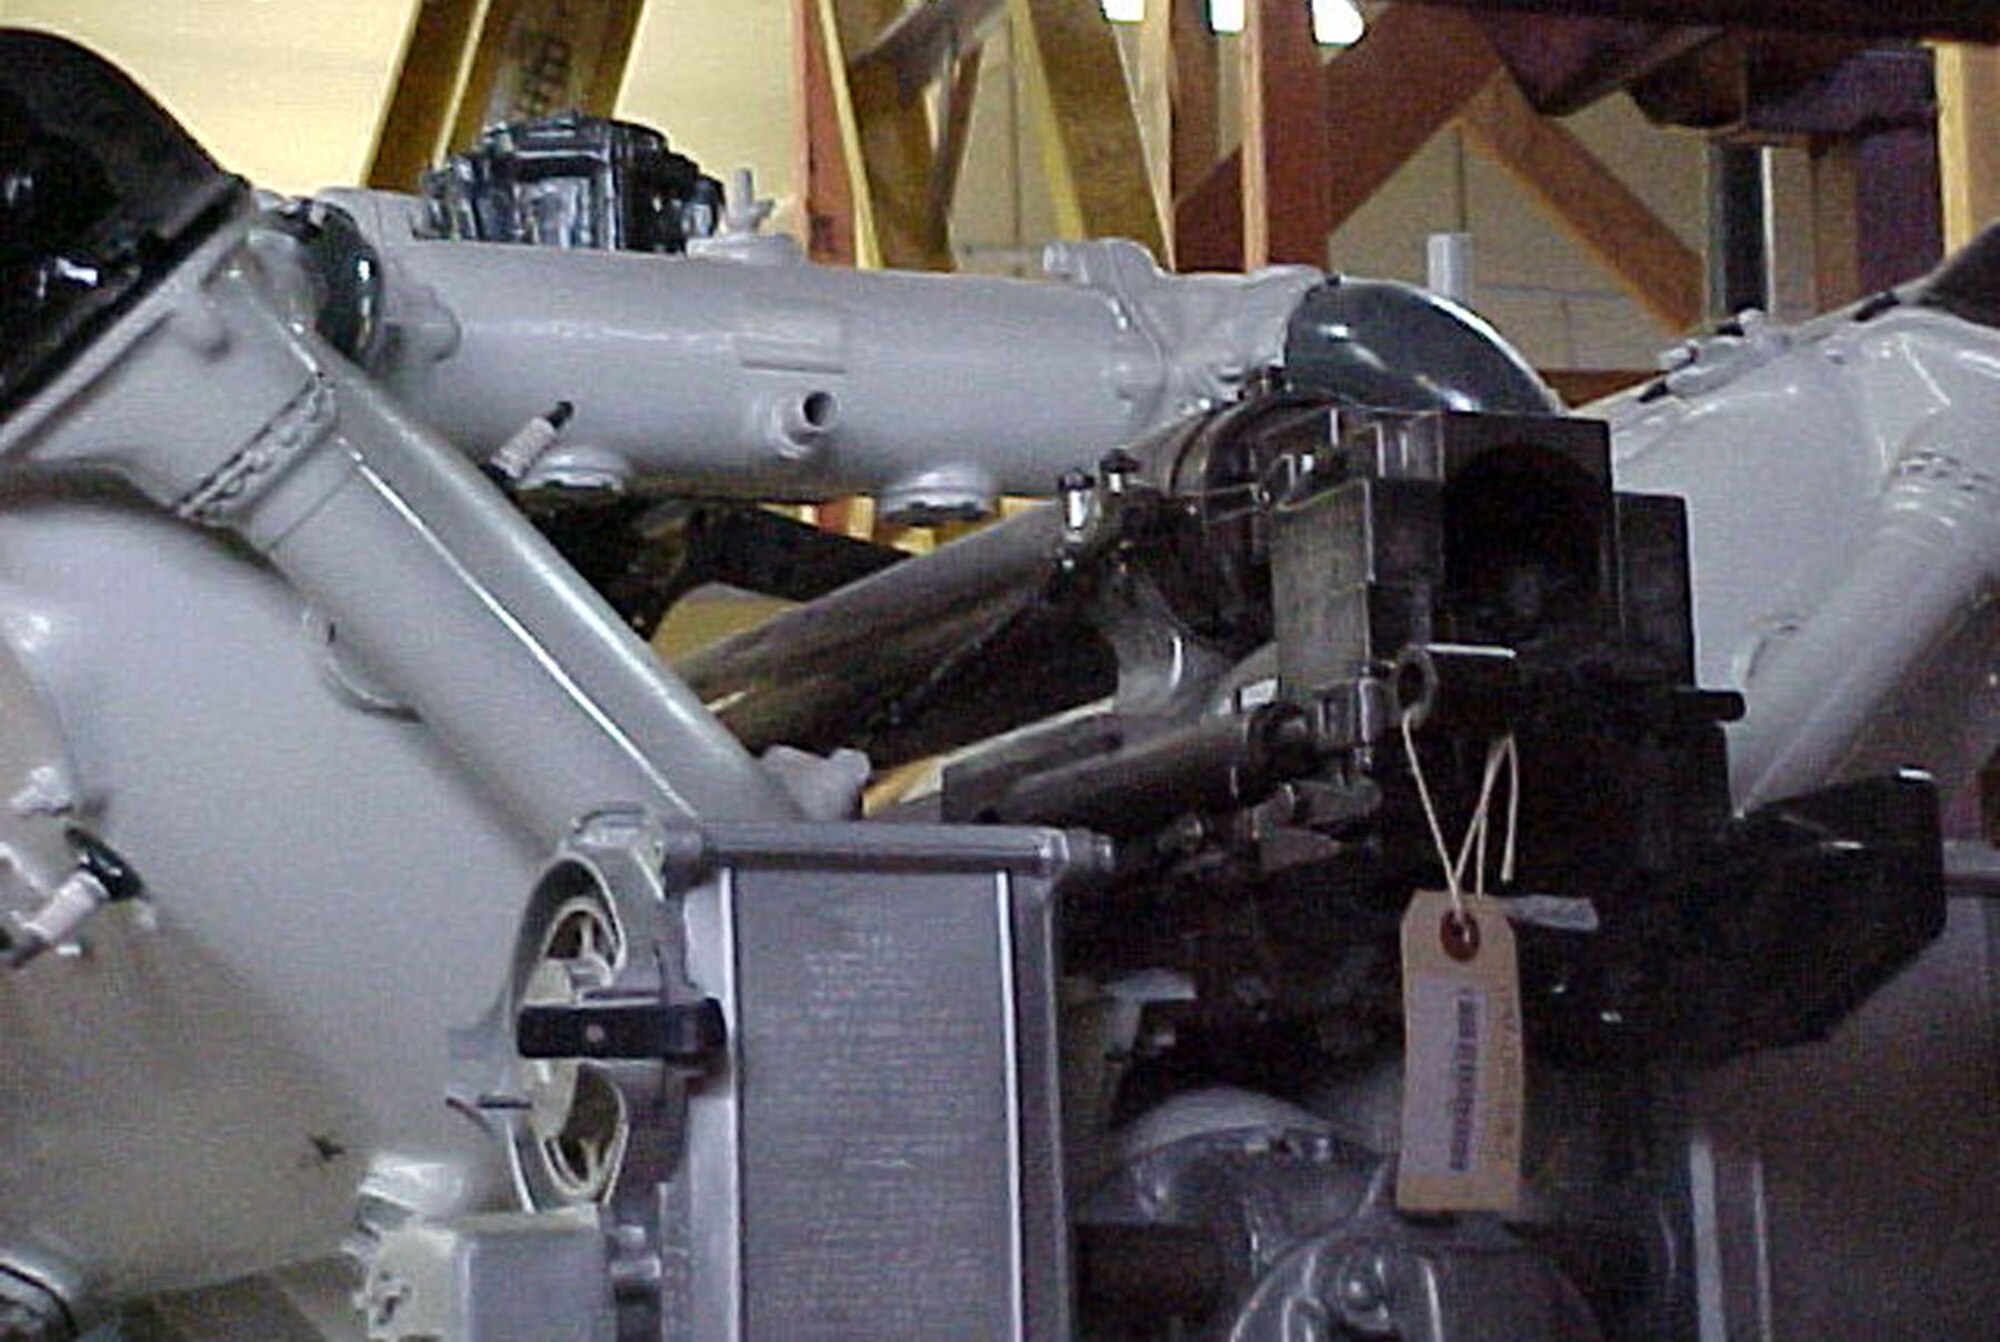 The first successful aircraft cannon -- a 37mm M3 cannon -- was mounted in the vee of the Hispano-Suiza V type, 8-cylinder, liquid-cooled engine for firing through the hollow propeller shaft. The French Hispano-Suiza engine was built in 1918 in the United States by the Wright-Martin Co. (U.S. Air Force photo)